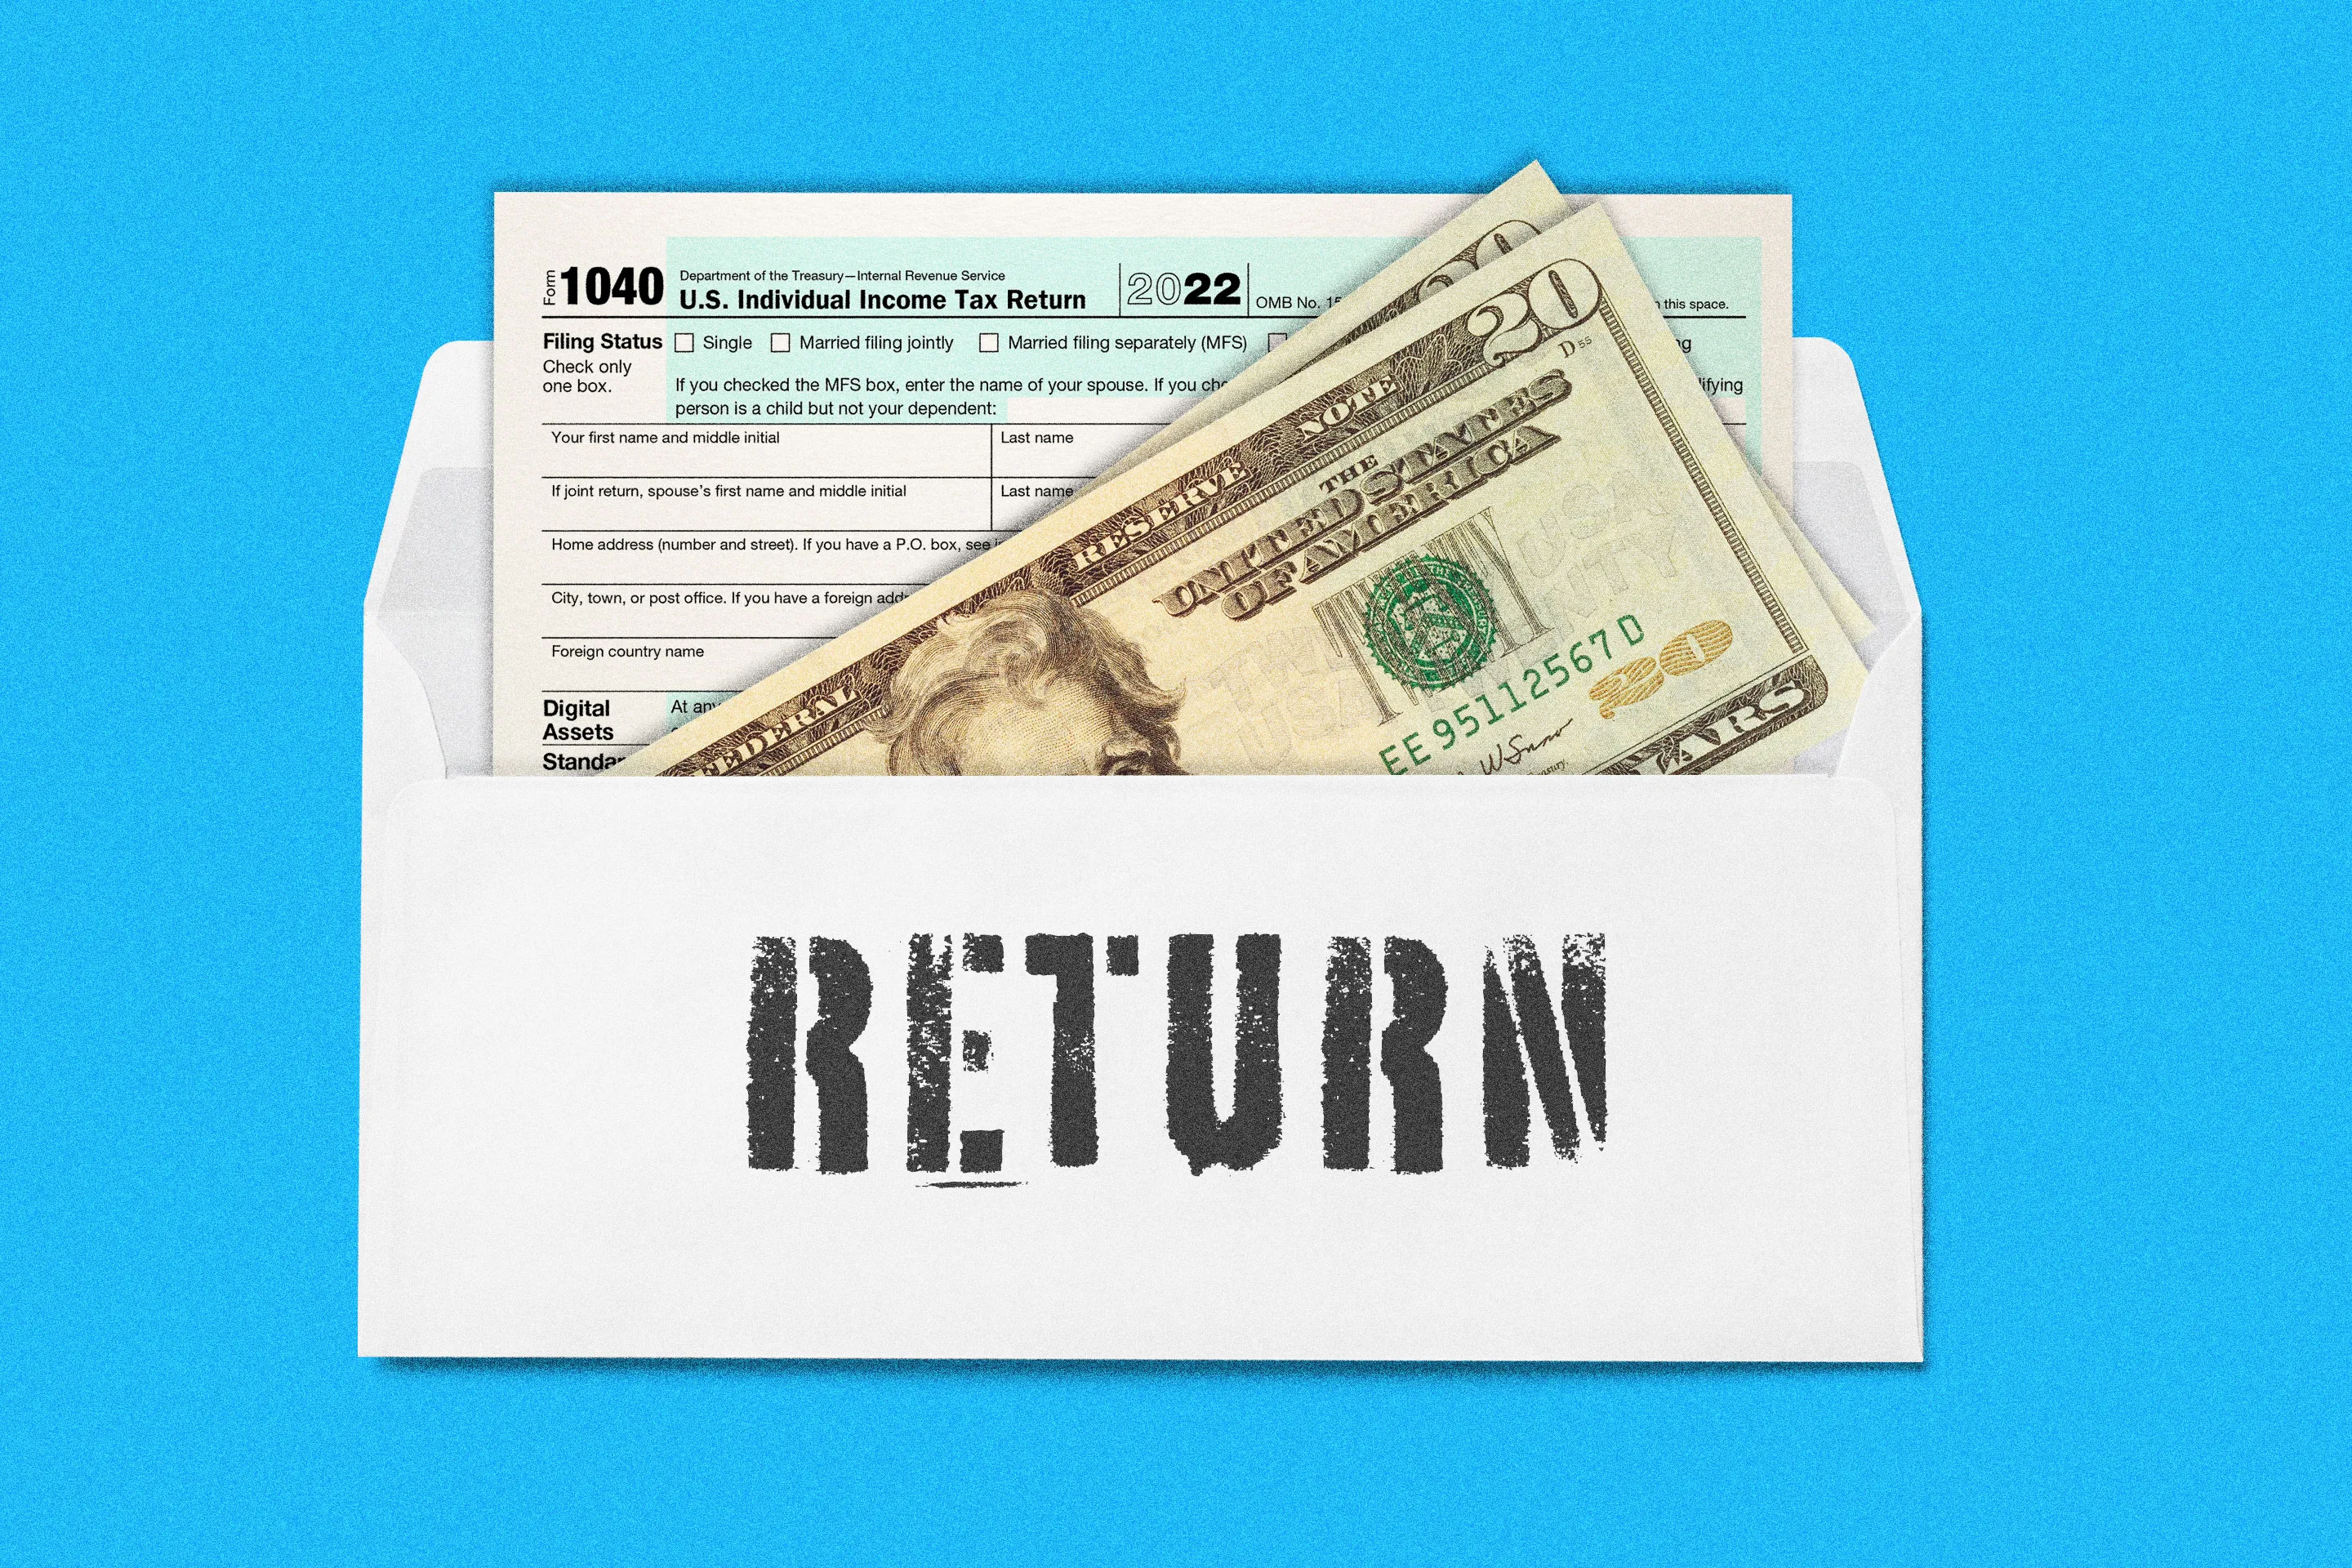 the-average-tax-refund-is-11-smaller-than-last-year-so-far-money